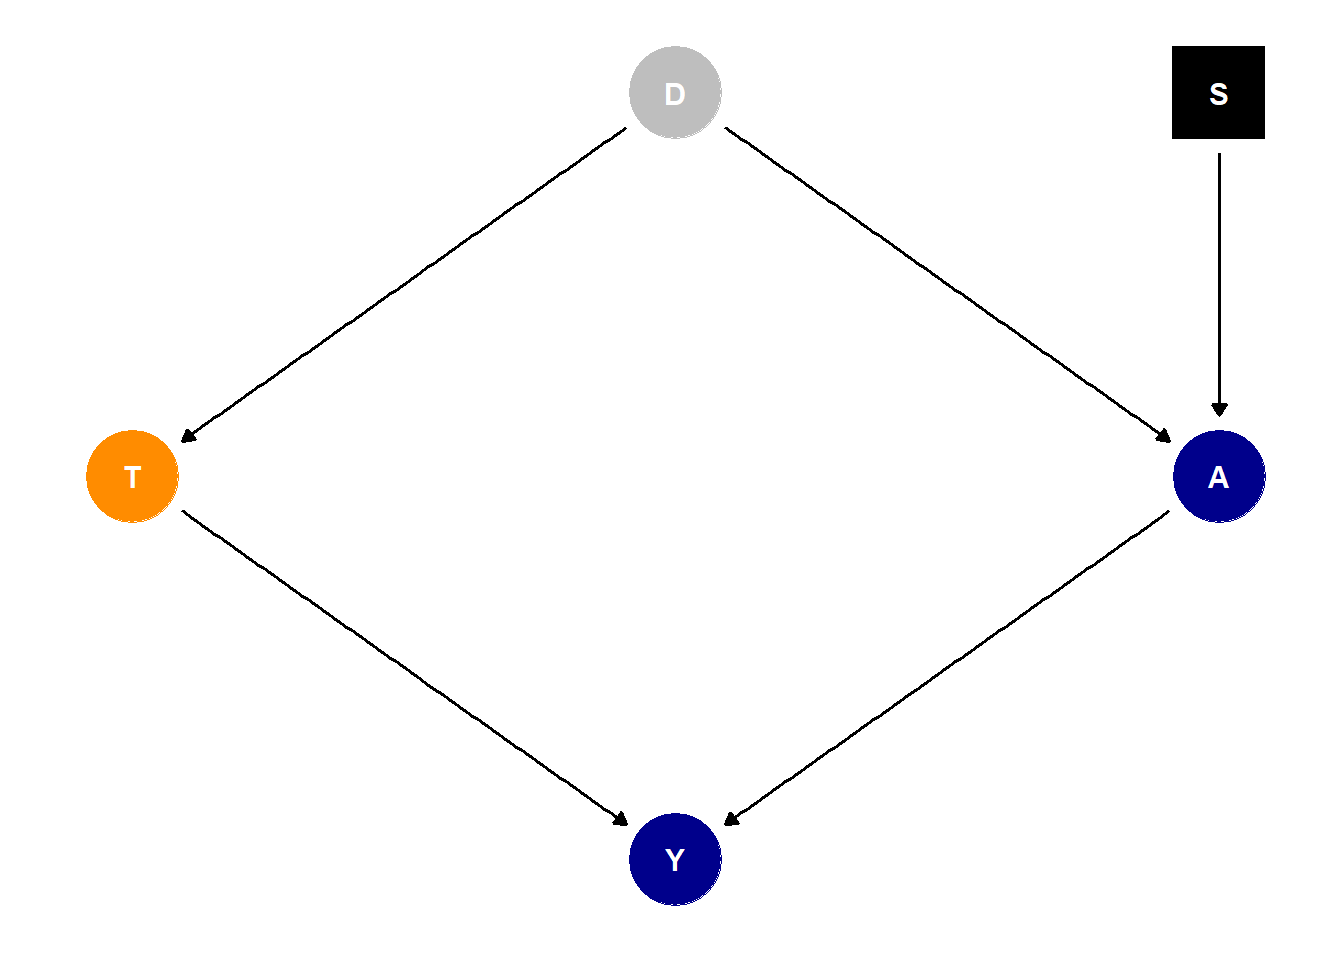 Directed acyclical graph specifying the causal relationships between a prediction target T, observed predictors A and Y, and an unobserved confounder D. The square node S represents a auxiliary selection variable that indicates variables that are mutable, i.e., change across different environments.